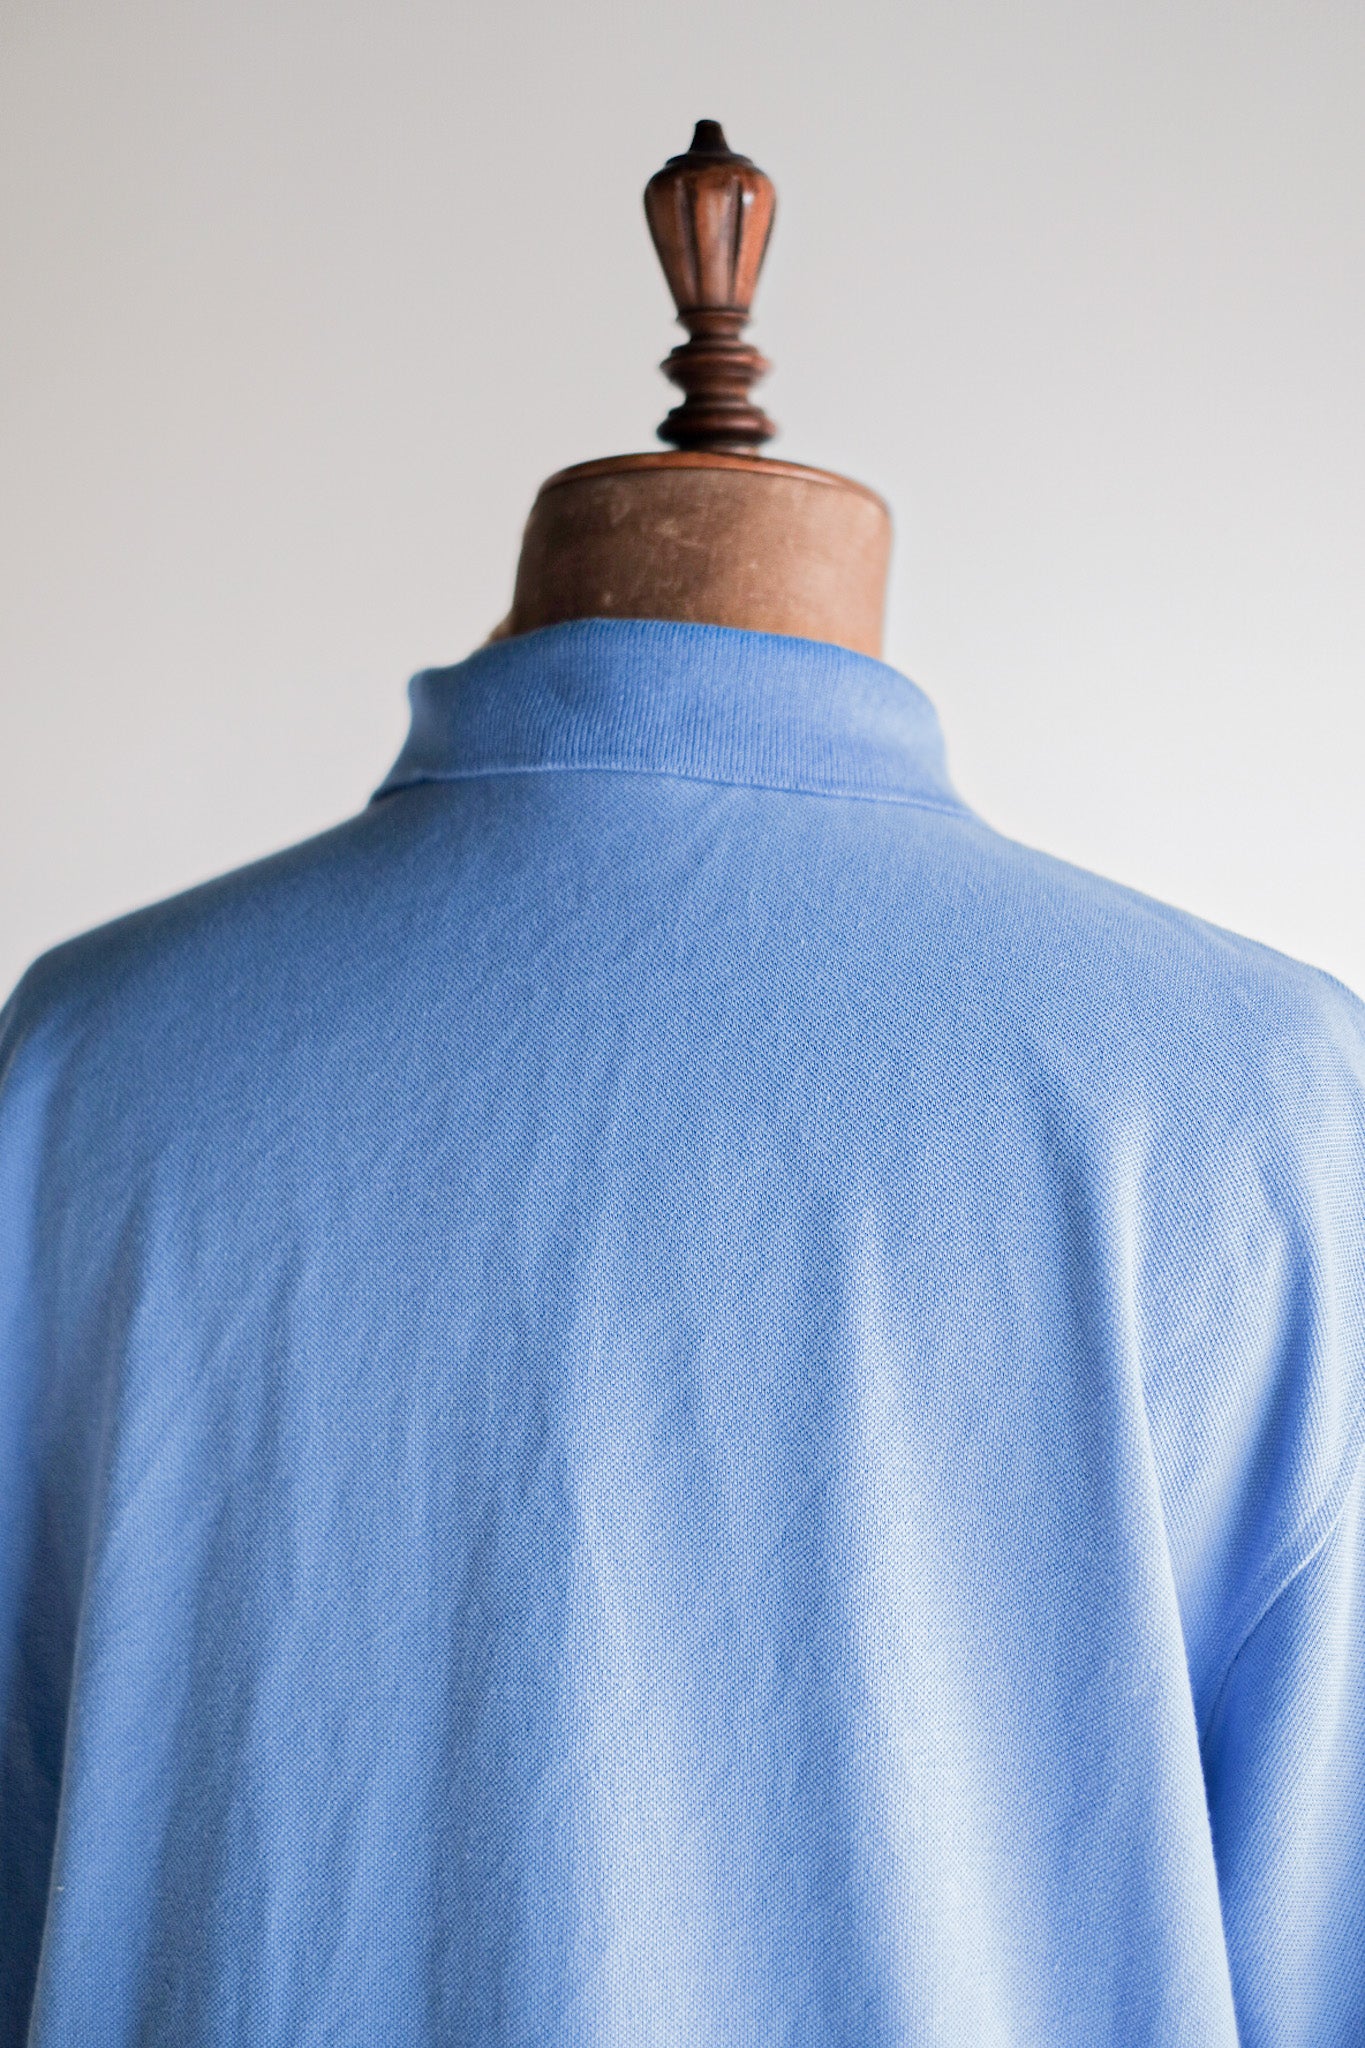 [~ 90's] Chemise Lacoste S / S Polo Taille.7 "Bleu clair"